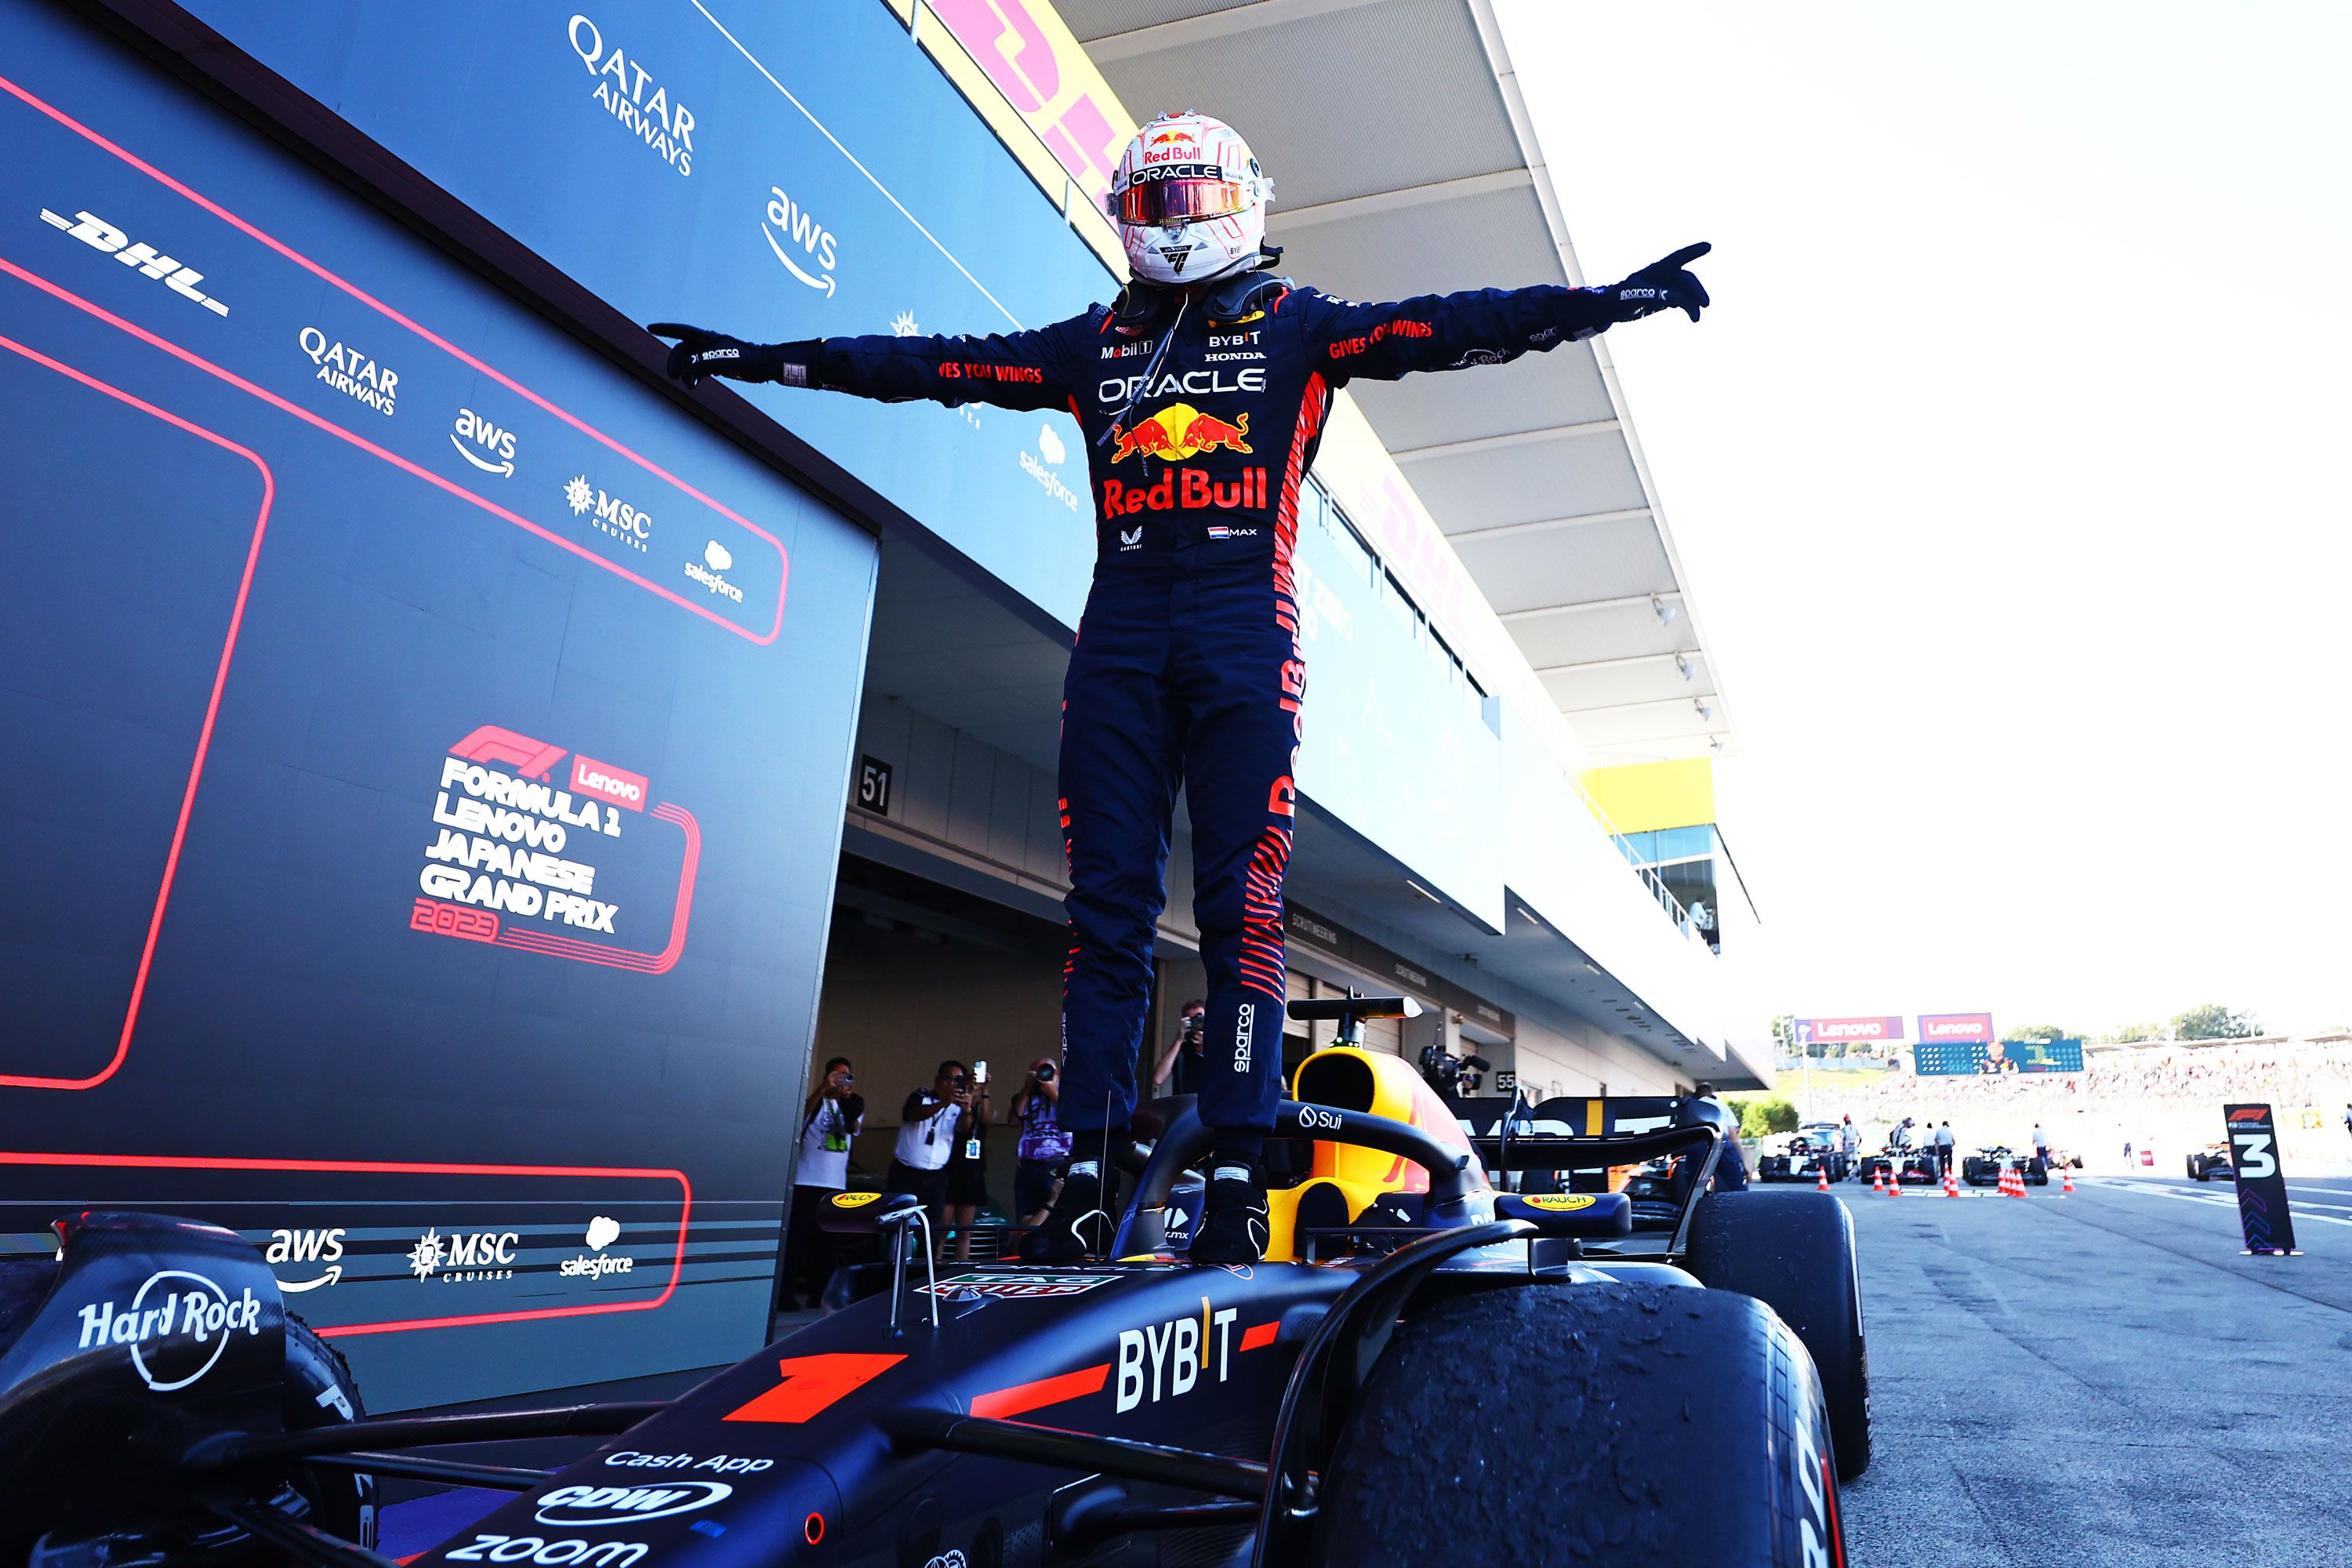 Red Bull's Race To The Top